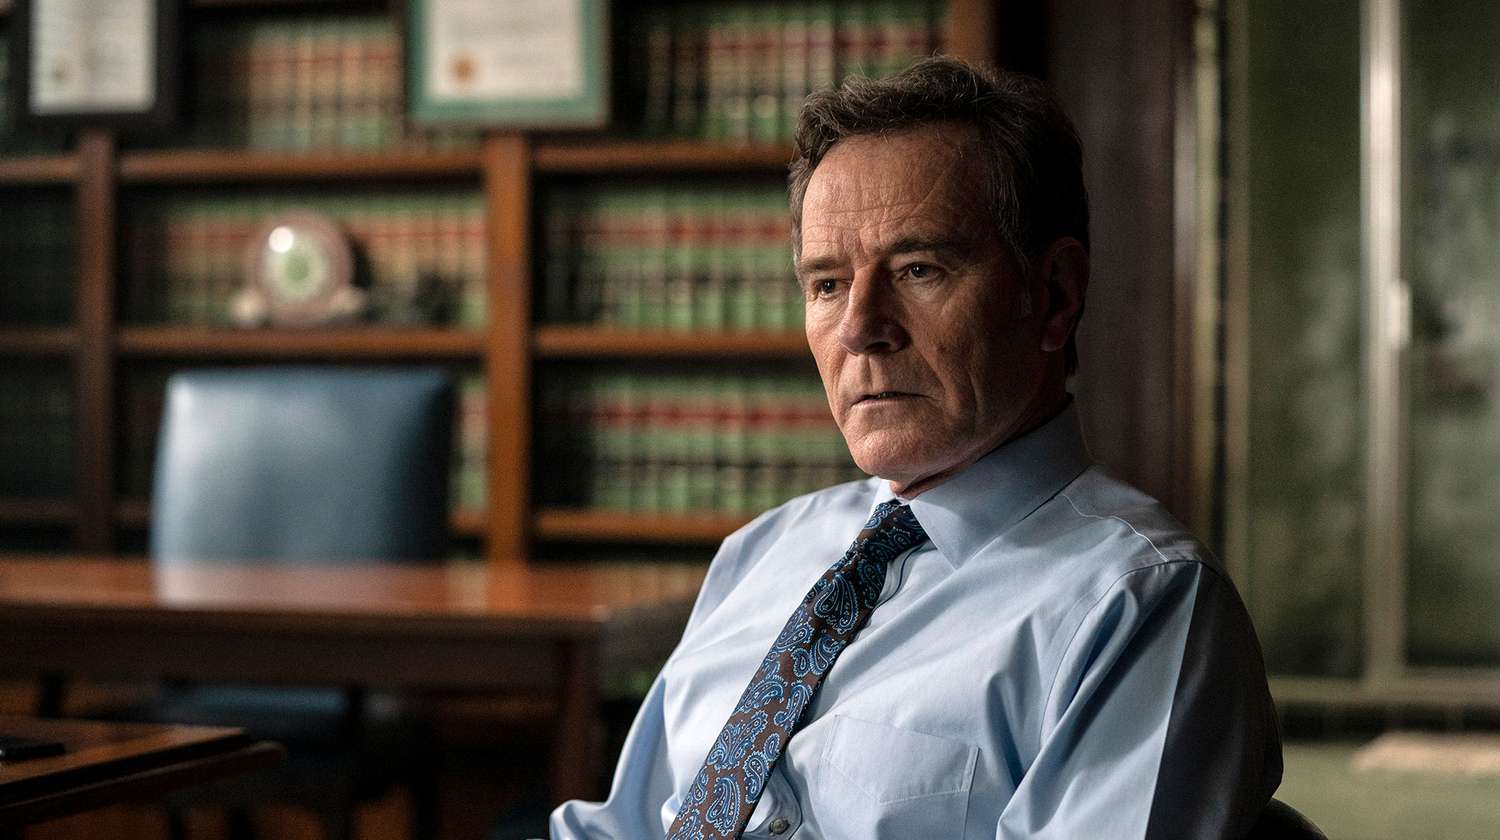 Bryan Cranston reveals 'Your Honor' is ending after season 2